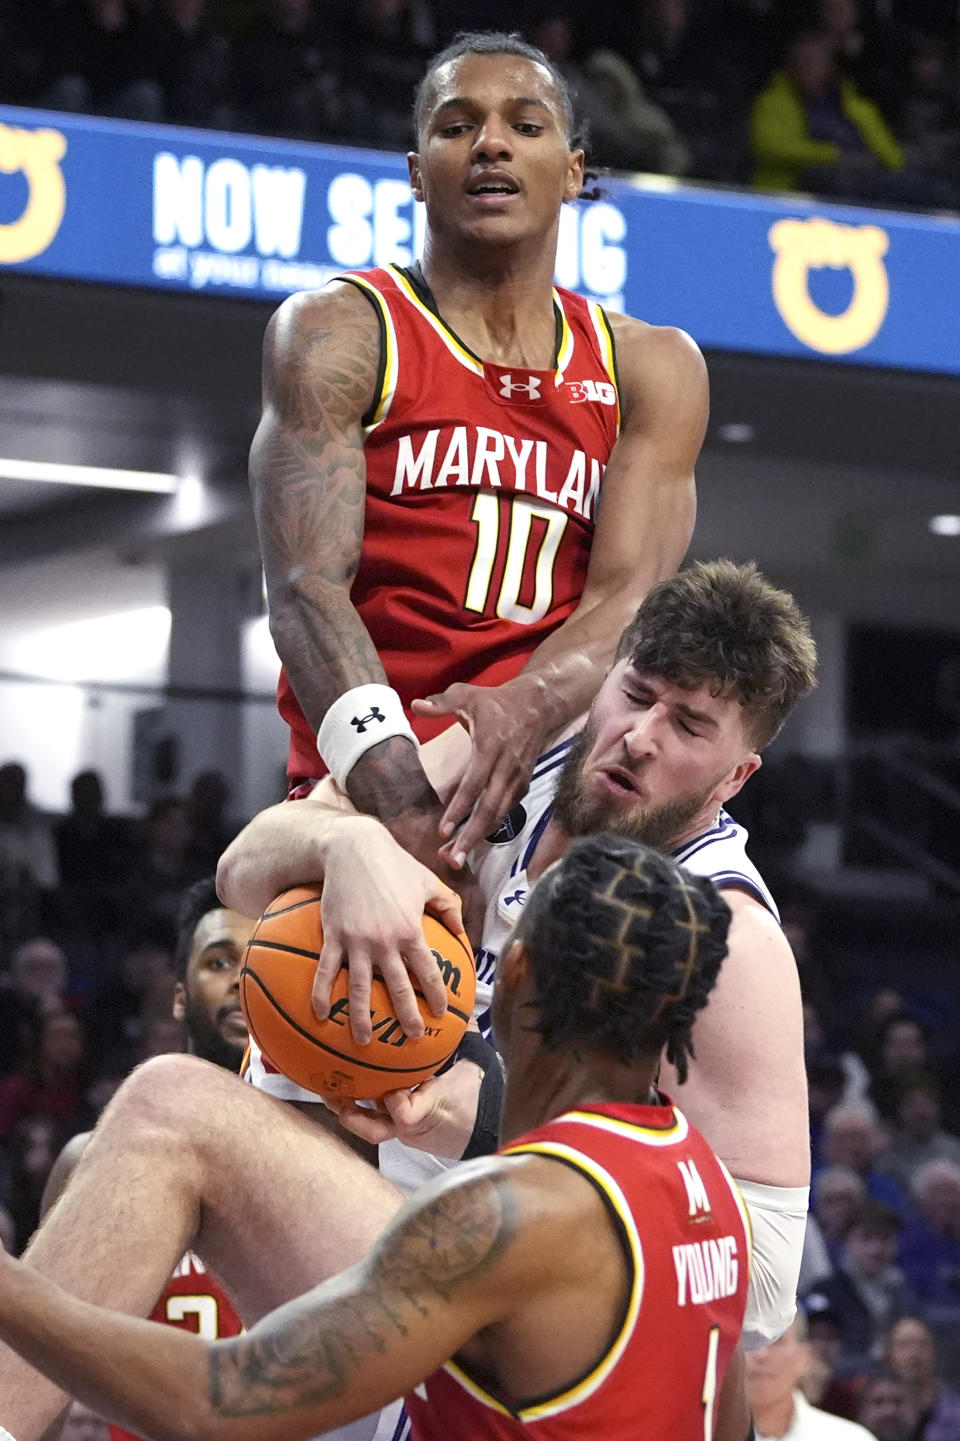 Northwestern center Matthew Nicholson vies for a rebound against Maryland forward Julian Reese, top, and guard Jahmir Young, foreground, during the second half of an NCAA college basketball game in Evanston, Ill., Wednesday, Jan. 17, 2024. (AP Photo/Nam Y. Huh)